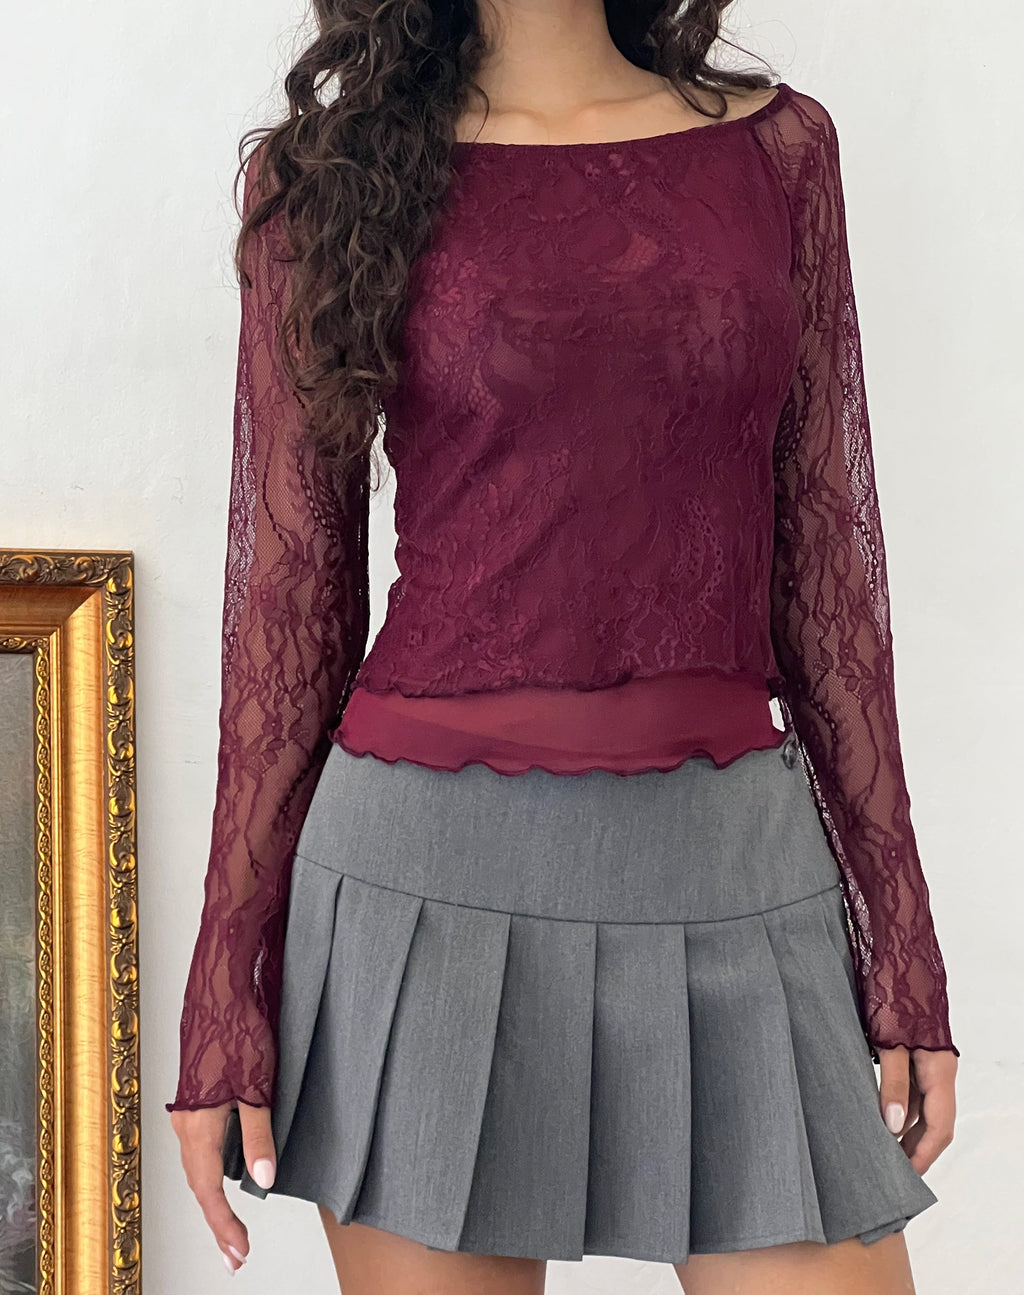 Rory Long Sleeve Top in Lace Burgundy